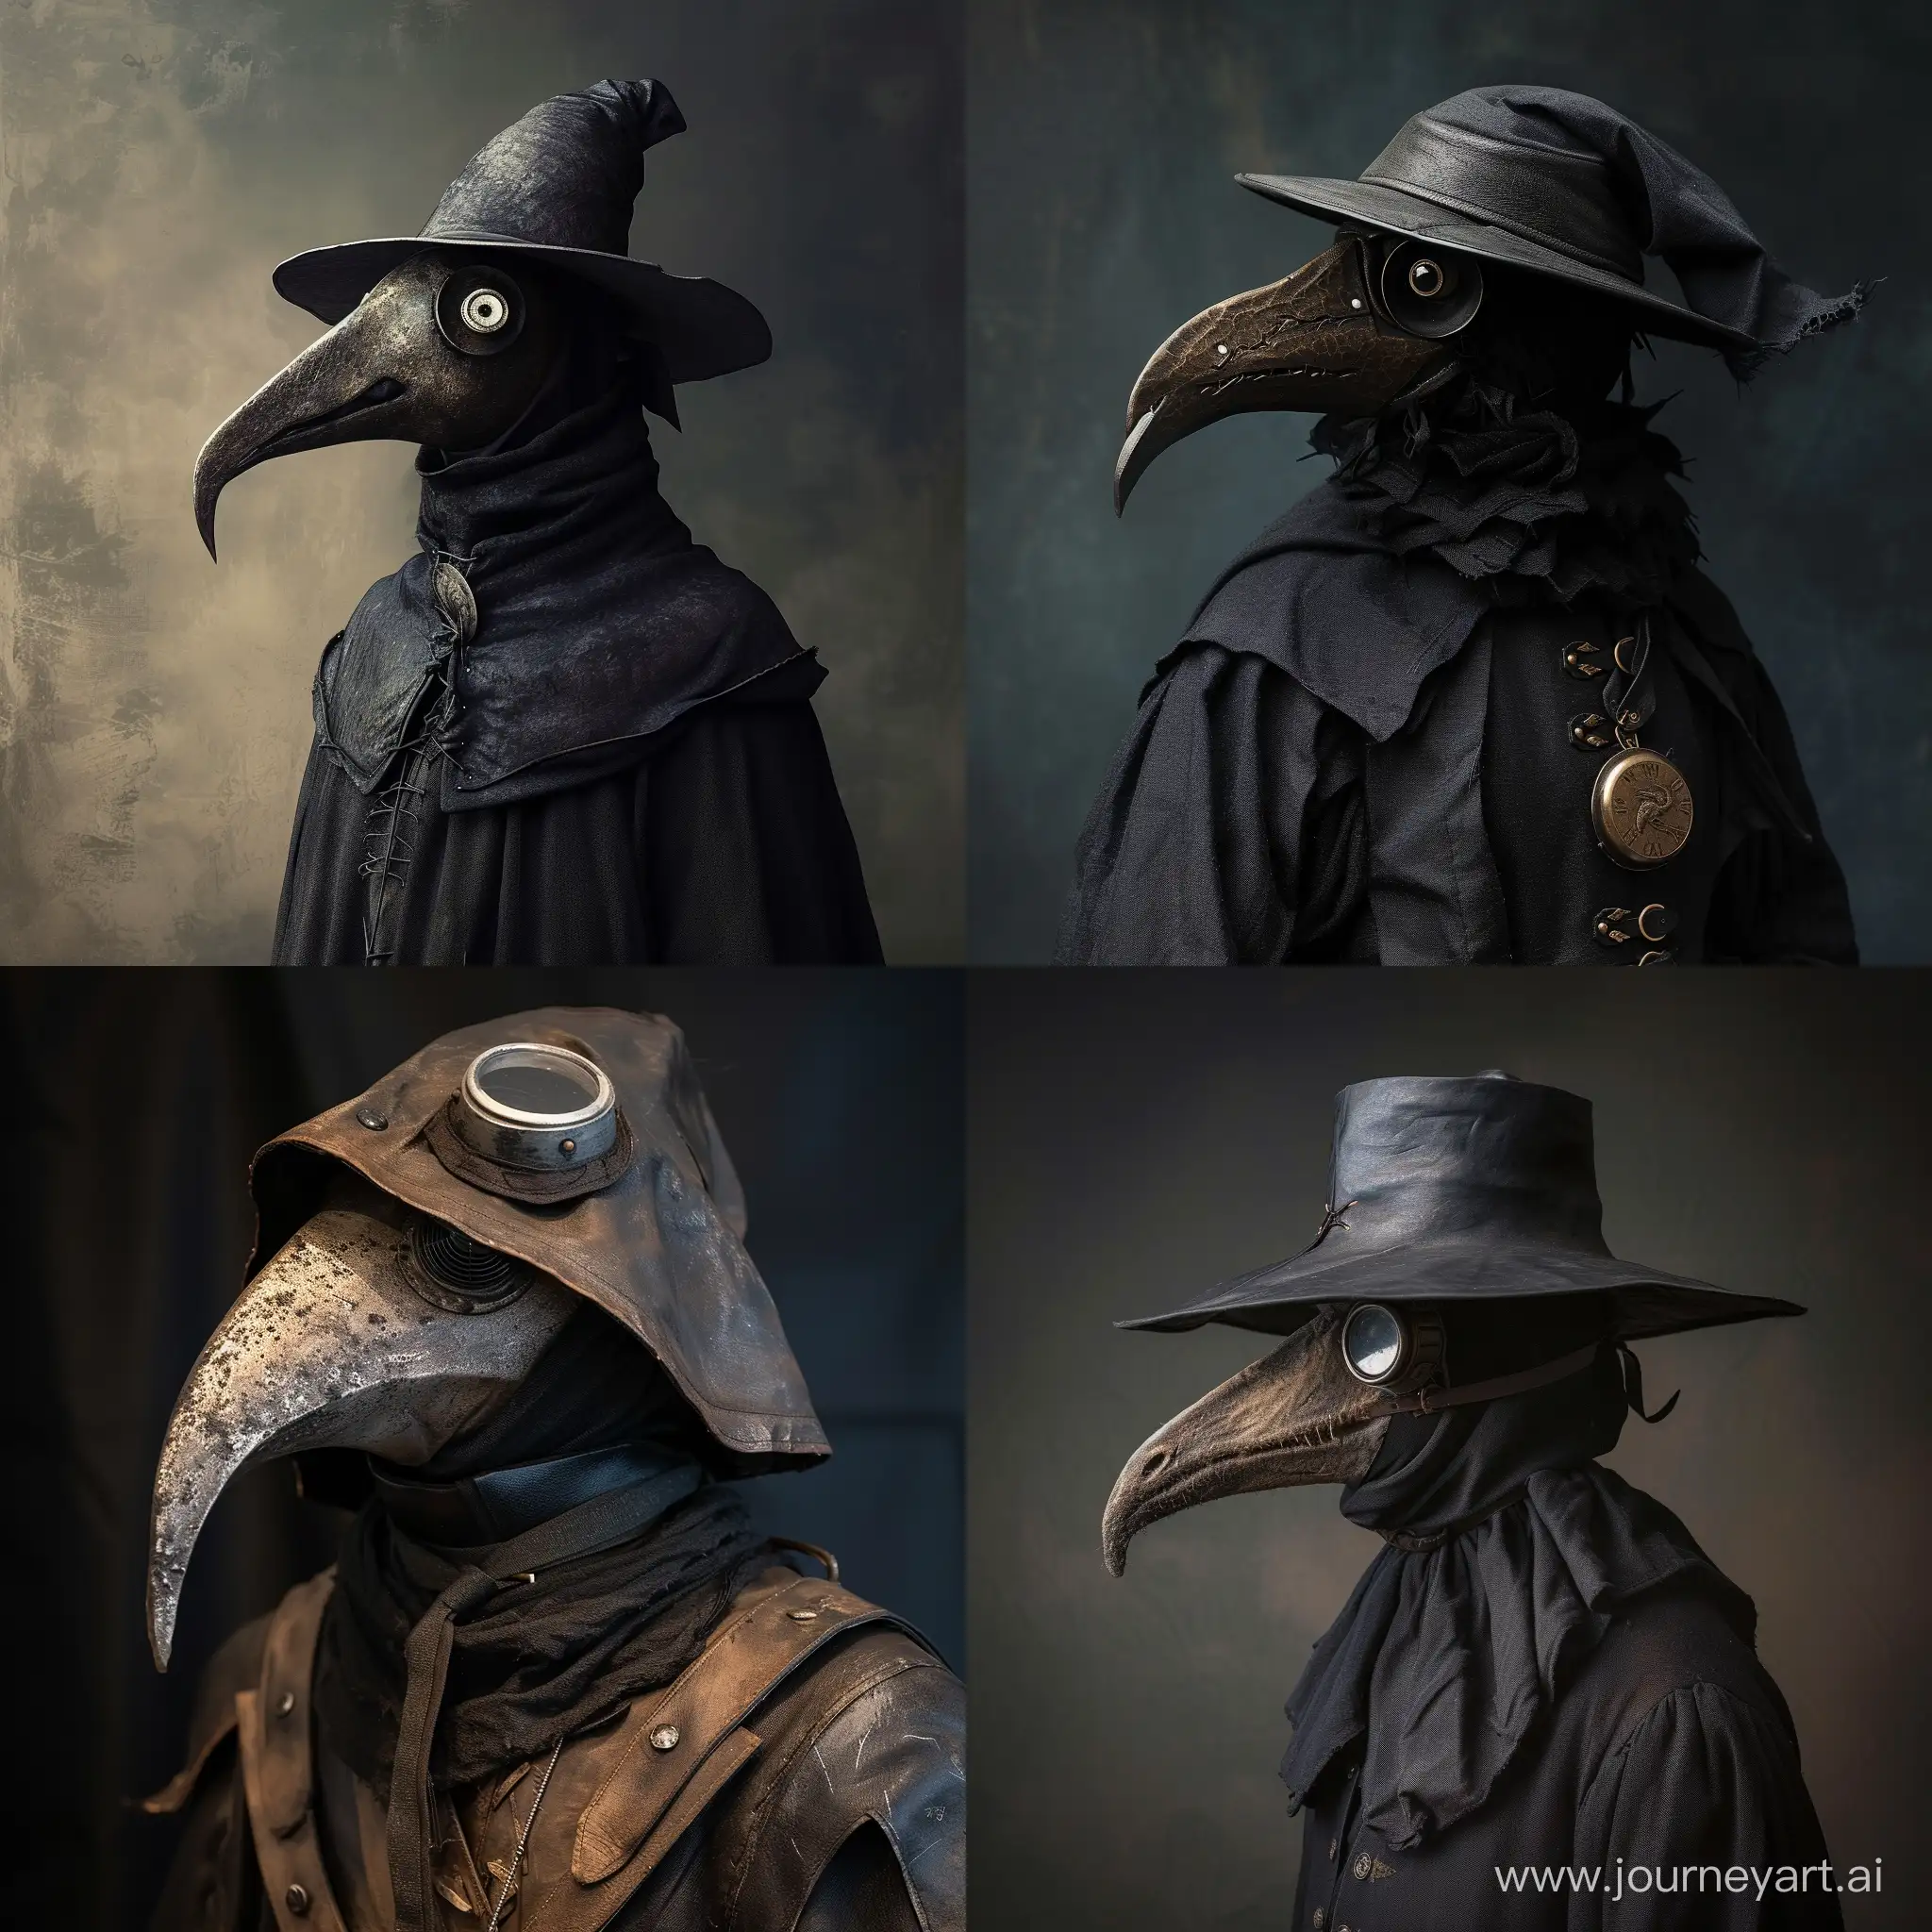 Middle-Ages-Plague-Doctor-Art-Mysterious-Figure-in-Authentic-Costume